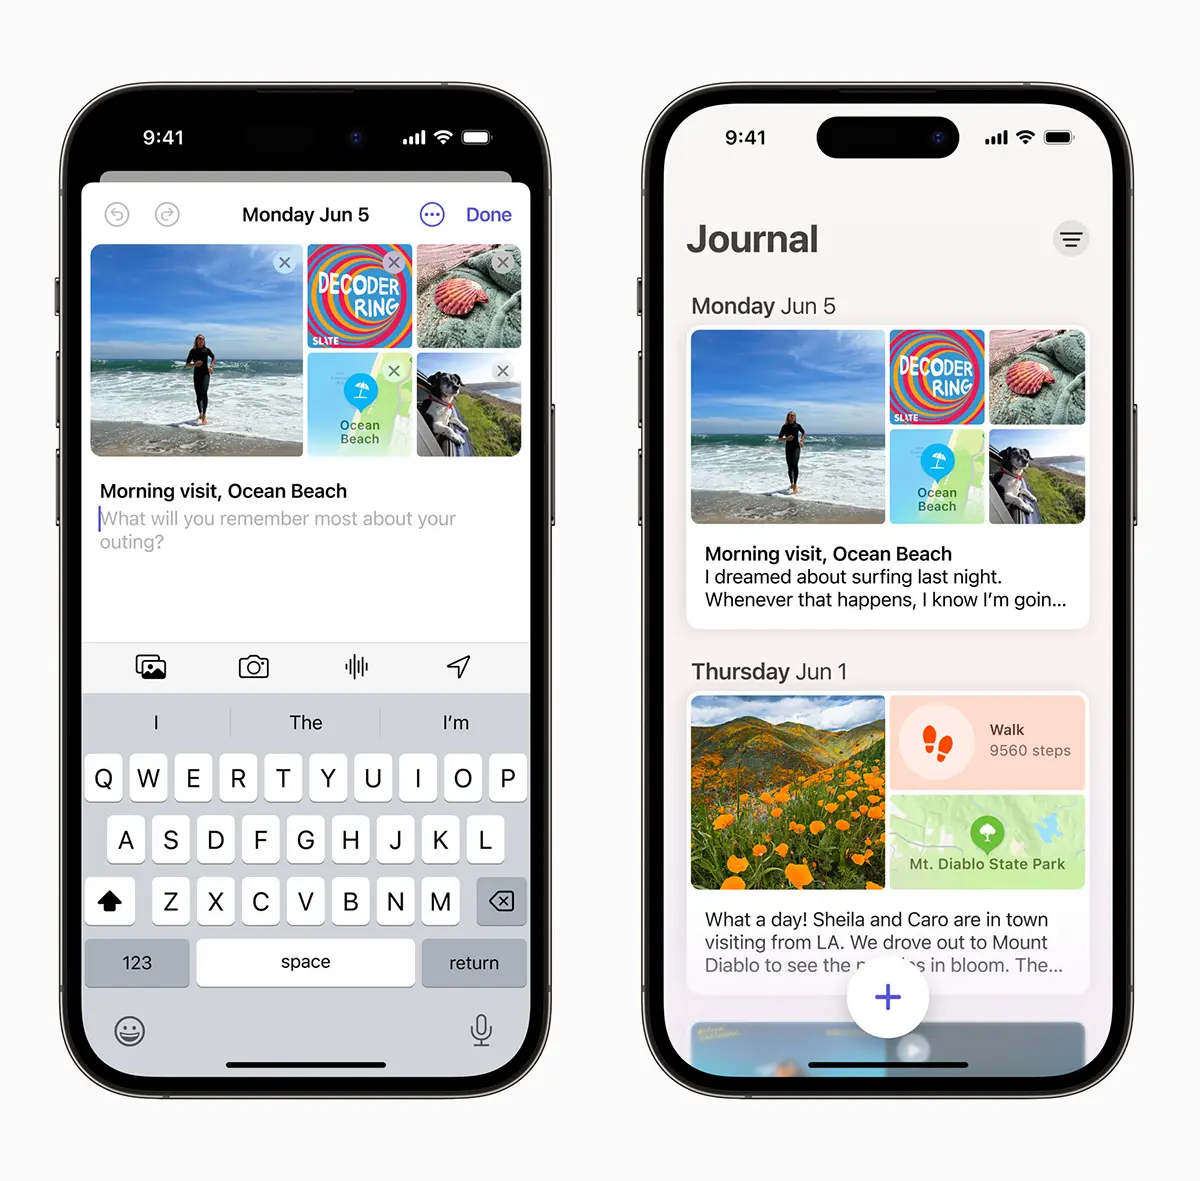 When will the Apple Journal app be launched for iPhone?